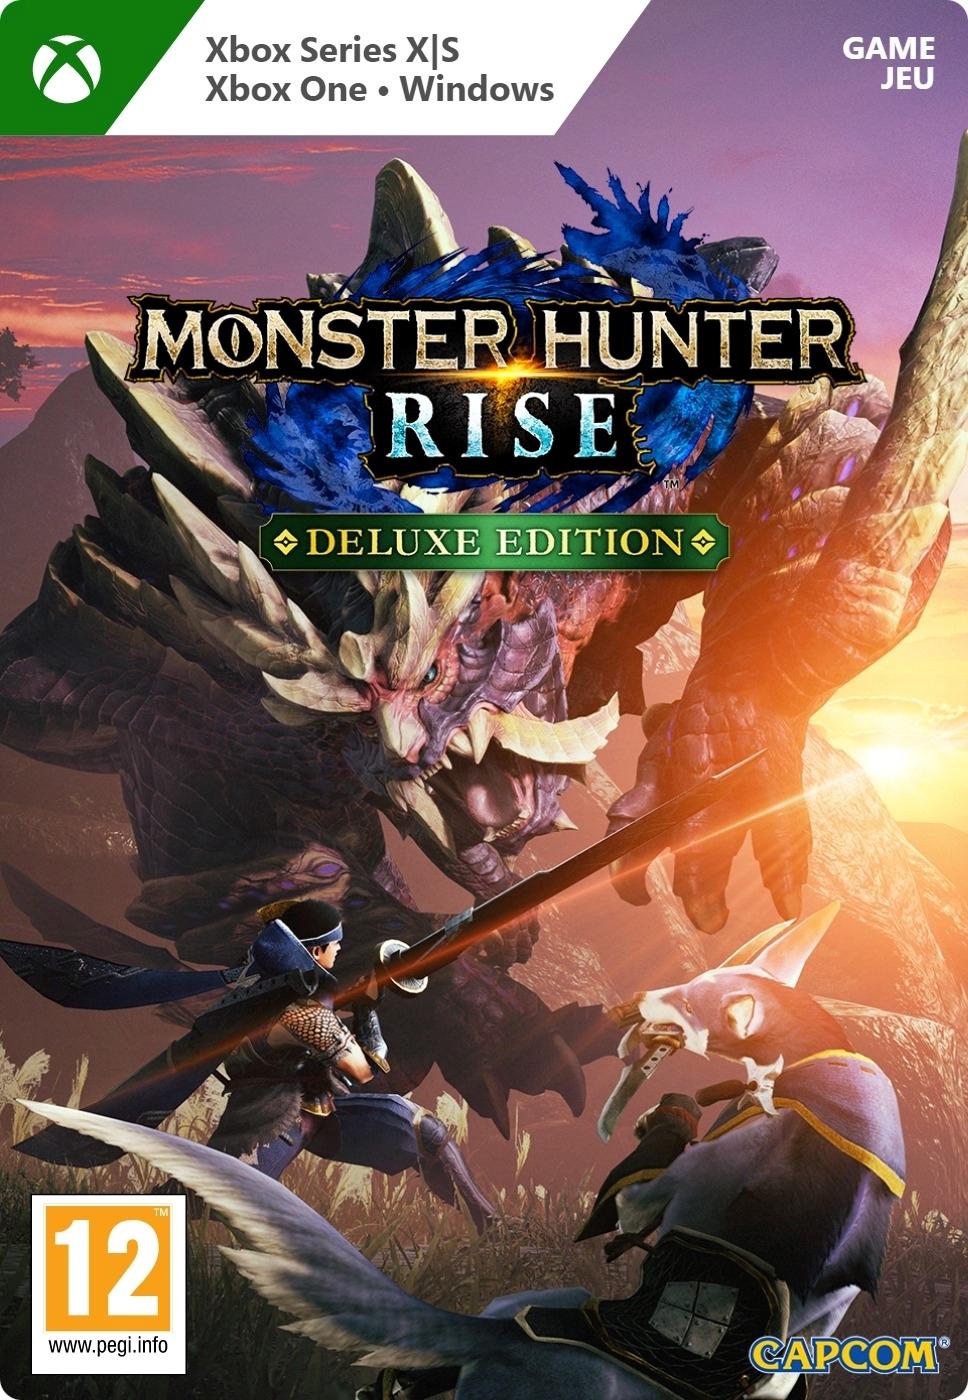 Monster Hunter Rise Deluxe Edition - Xbox Series X/Xbox One/Win10 - Game | G3Q-01834 (a2389430-0b03-8343-aaea-547fc9948fd6)